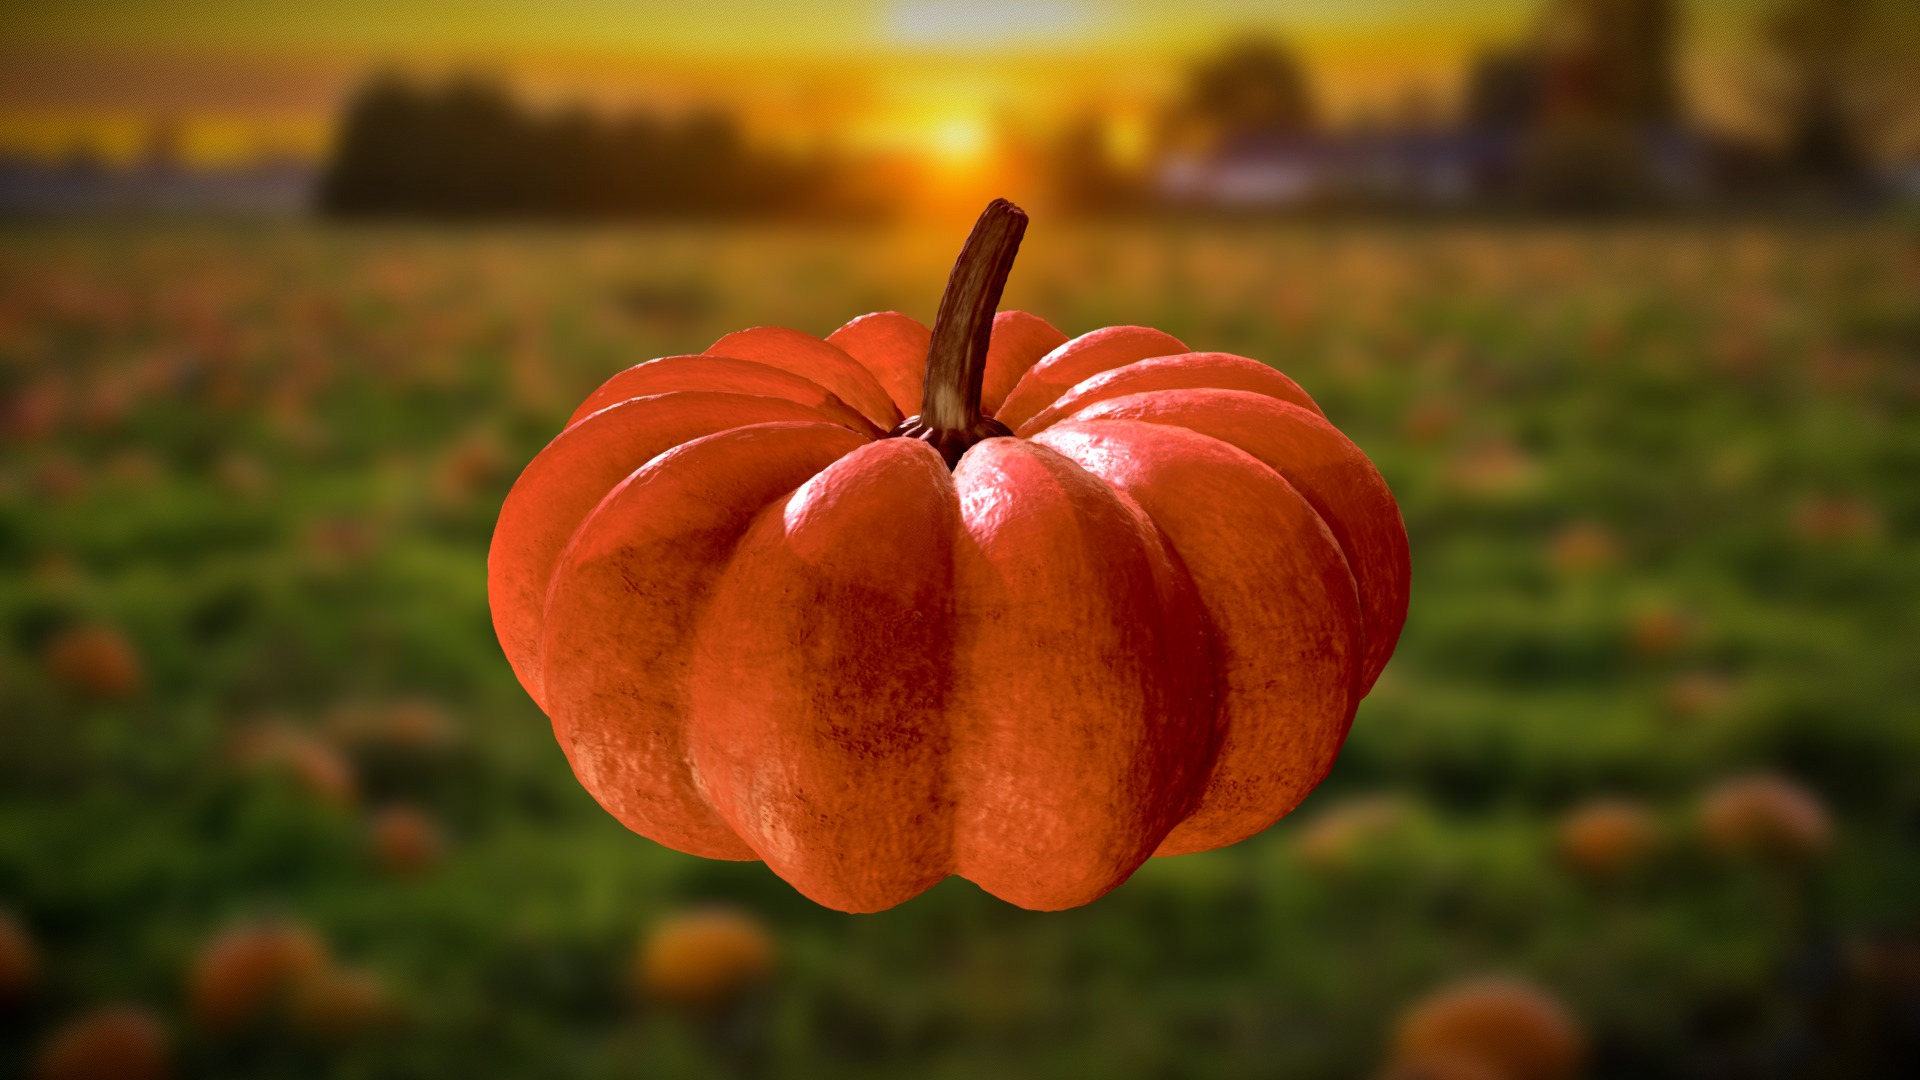 3D model Pumpkin Squash - This is a 3D model of the Pumpkin Squash. The 3D model is about a red apple on grass.